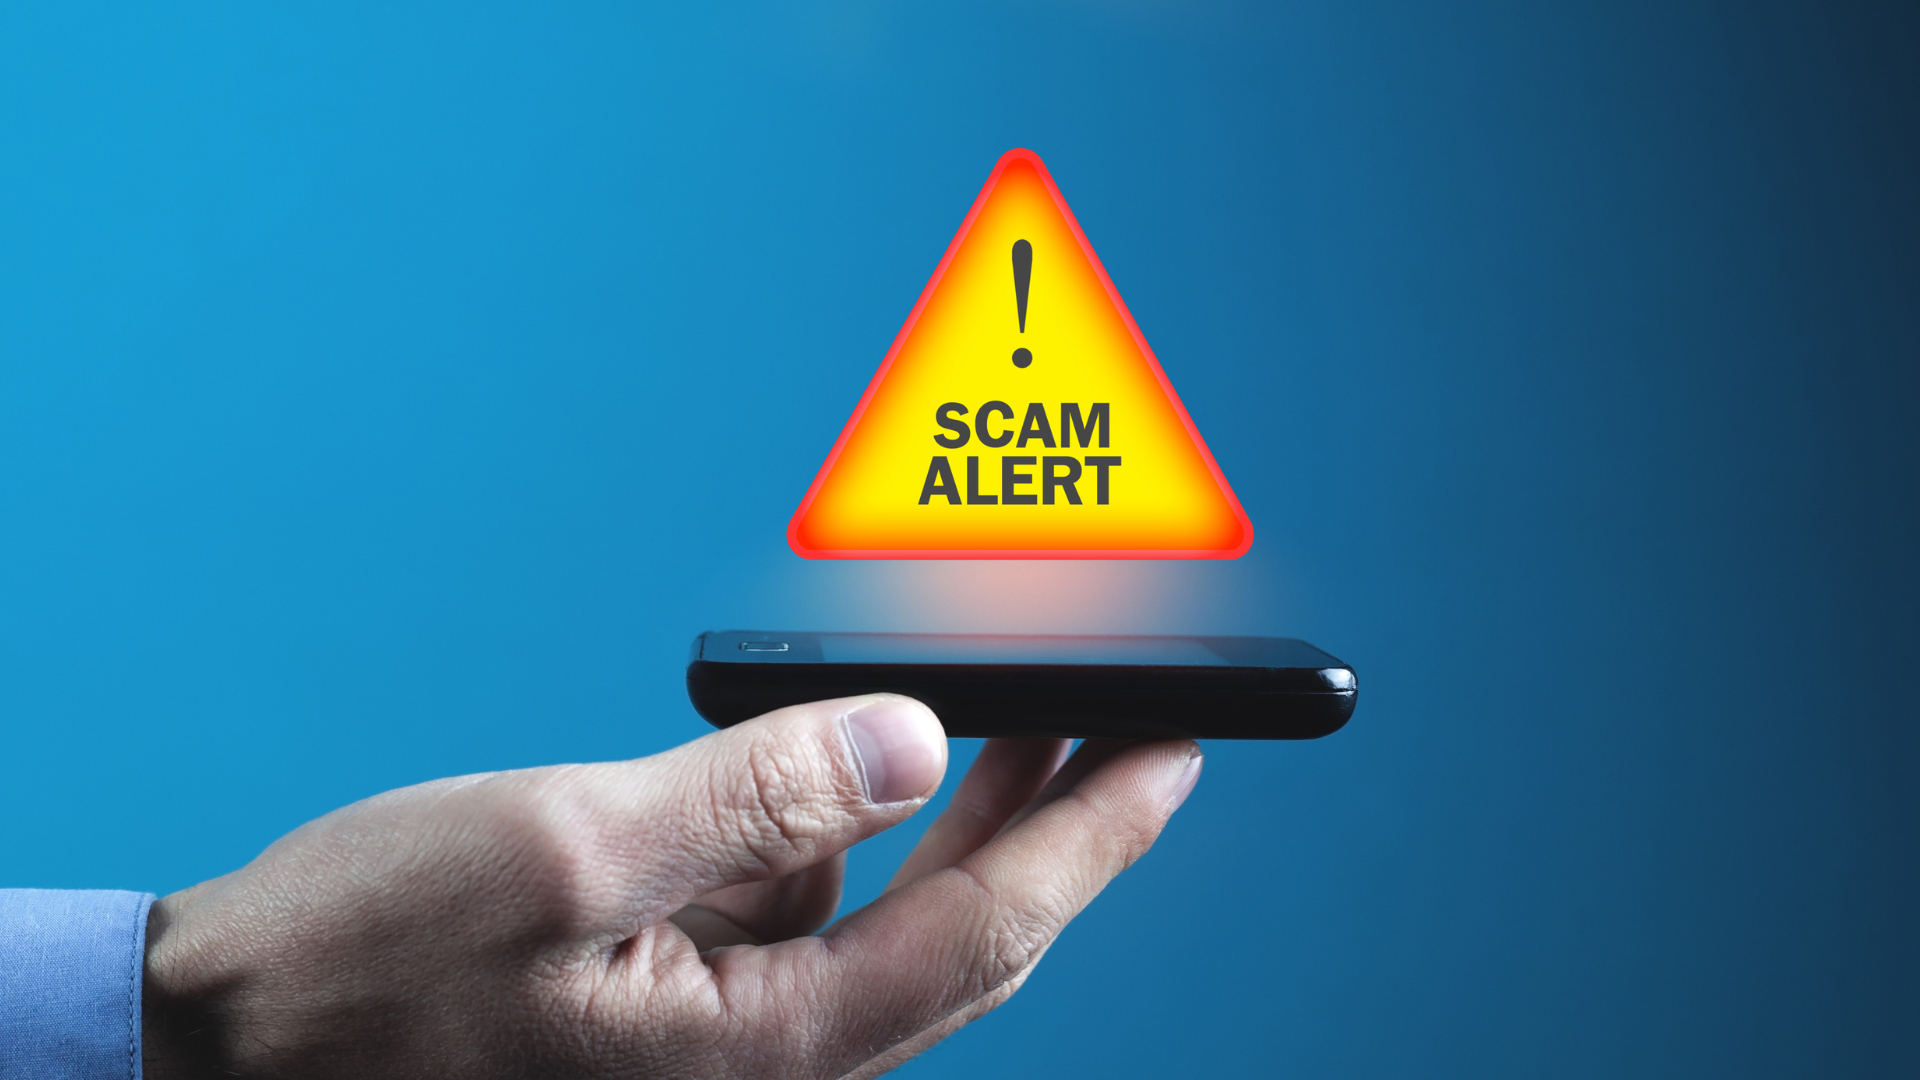 A person is holding a cell phone with a scam alert sign coming out of it.